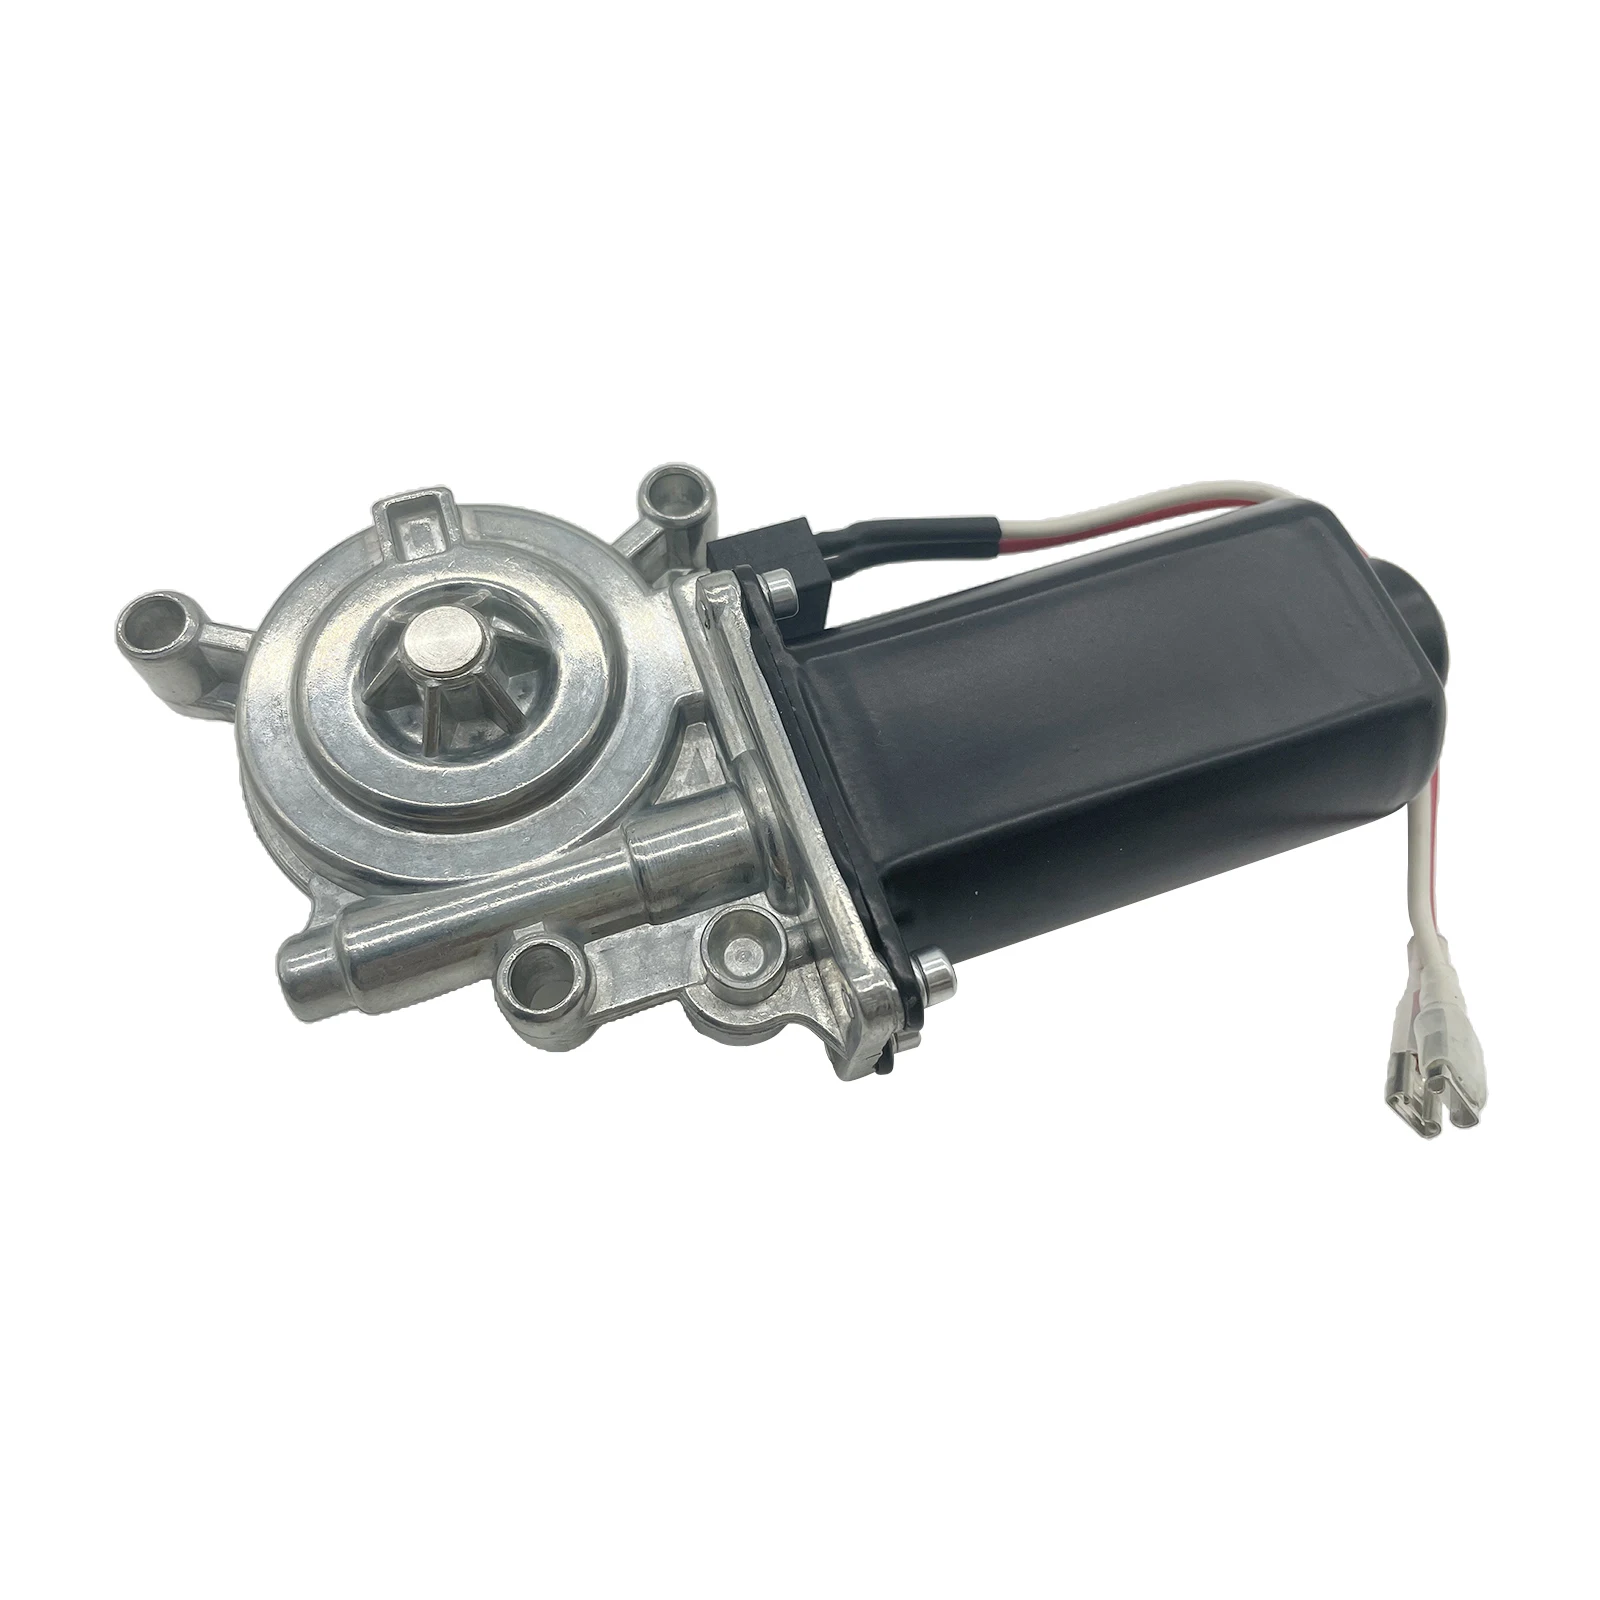 RV Motorhome Trailer Power Awning Replacement Motor Compatible with  266149, 12 DC, 75-RPM motor